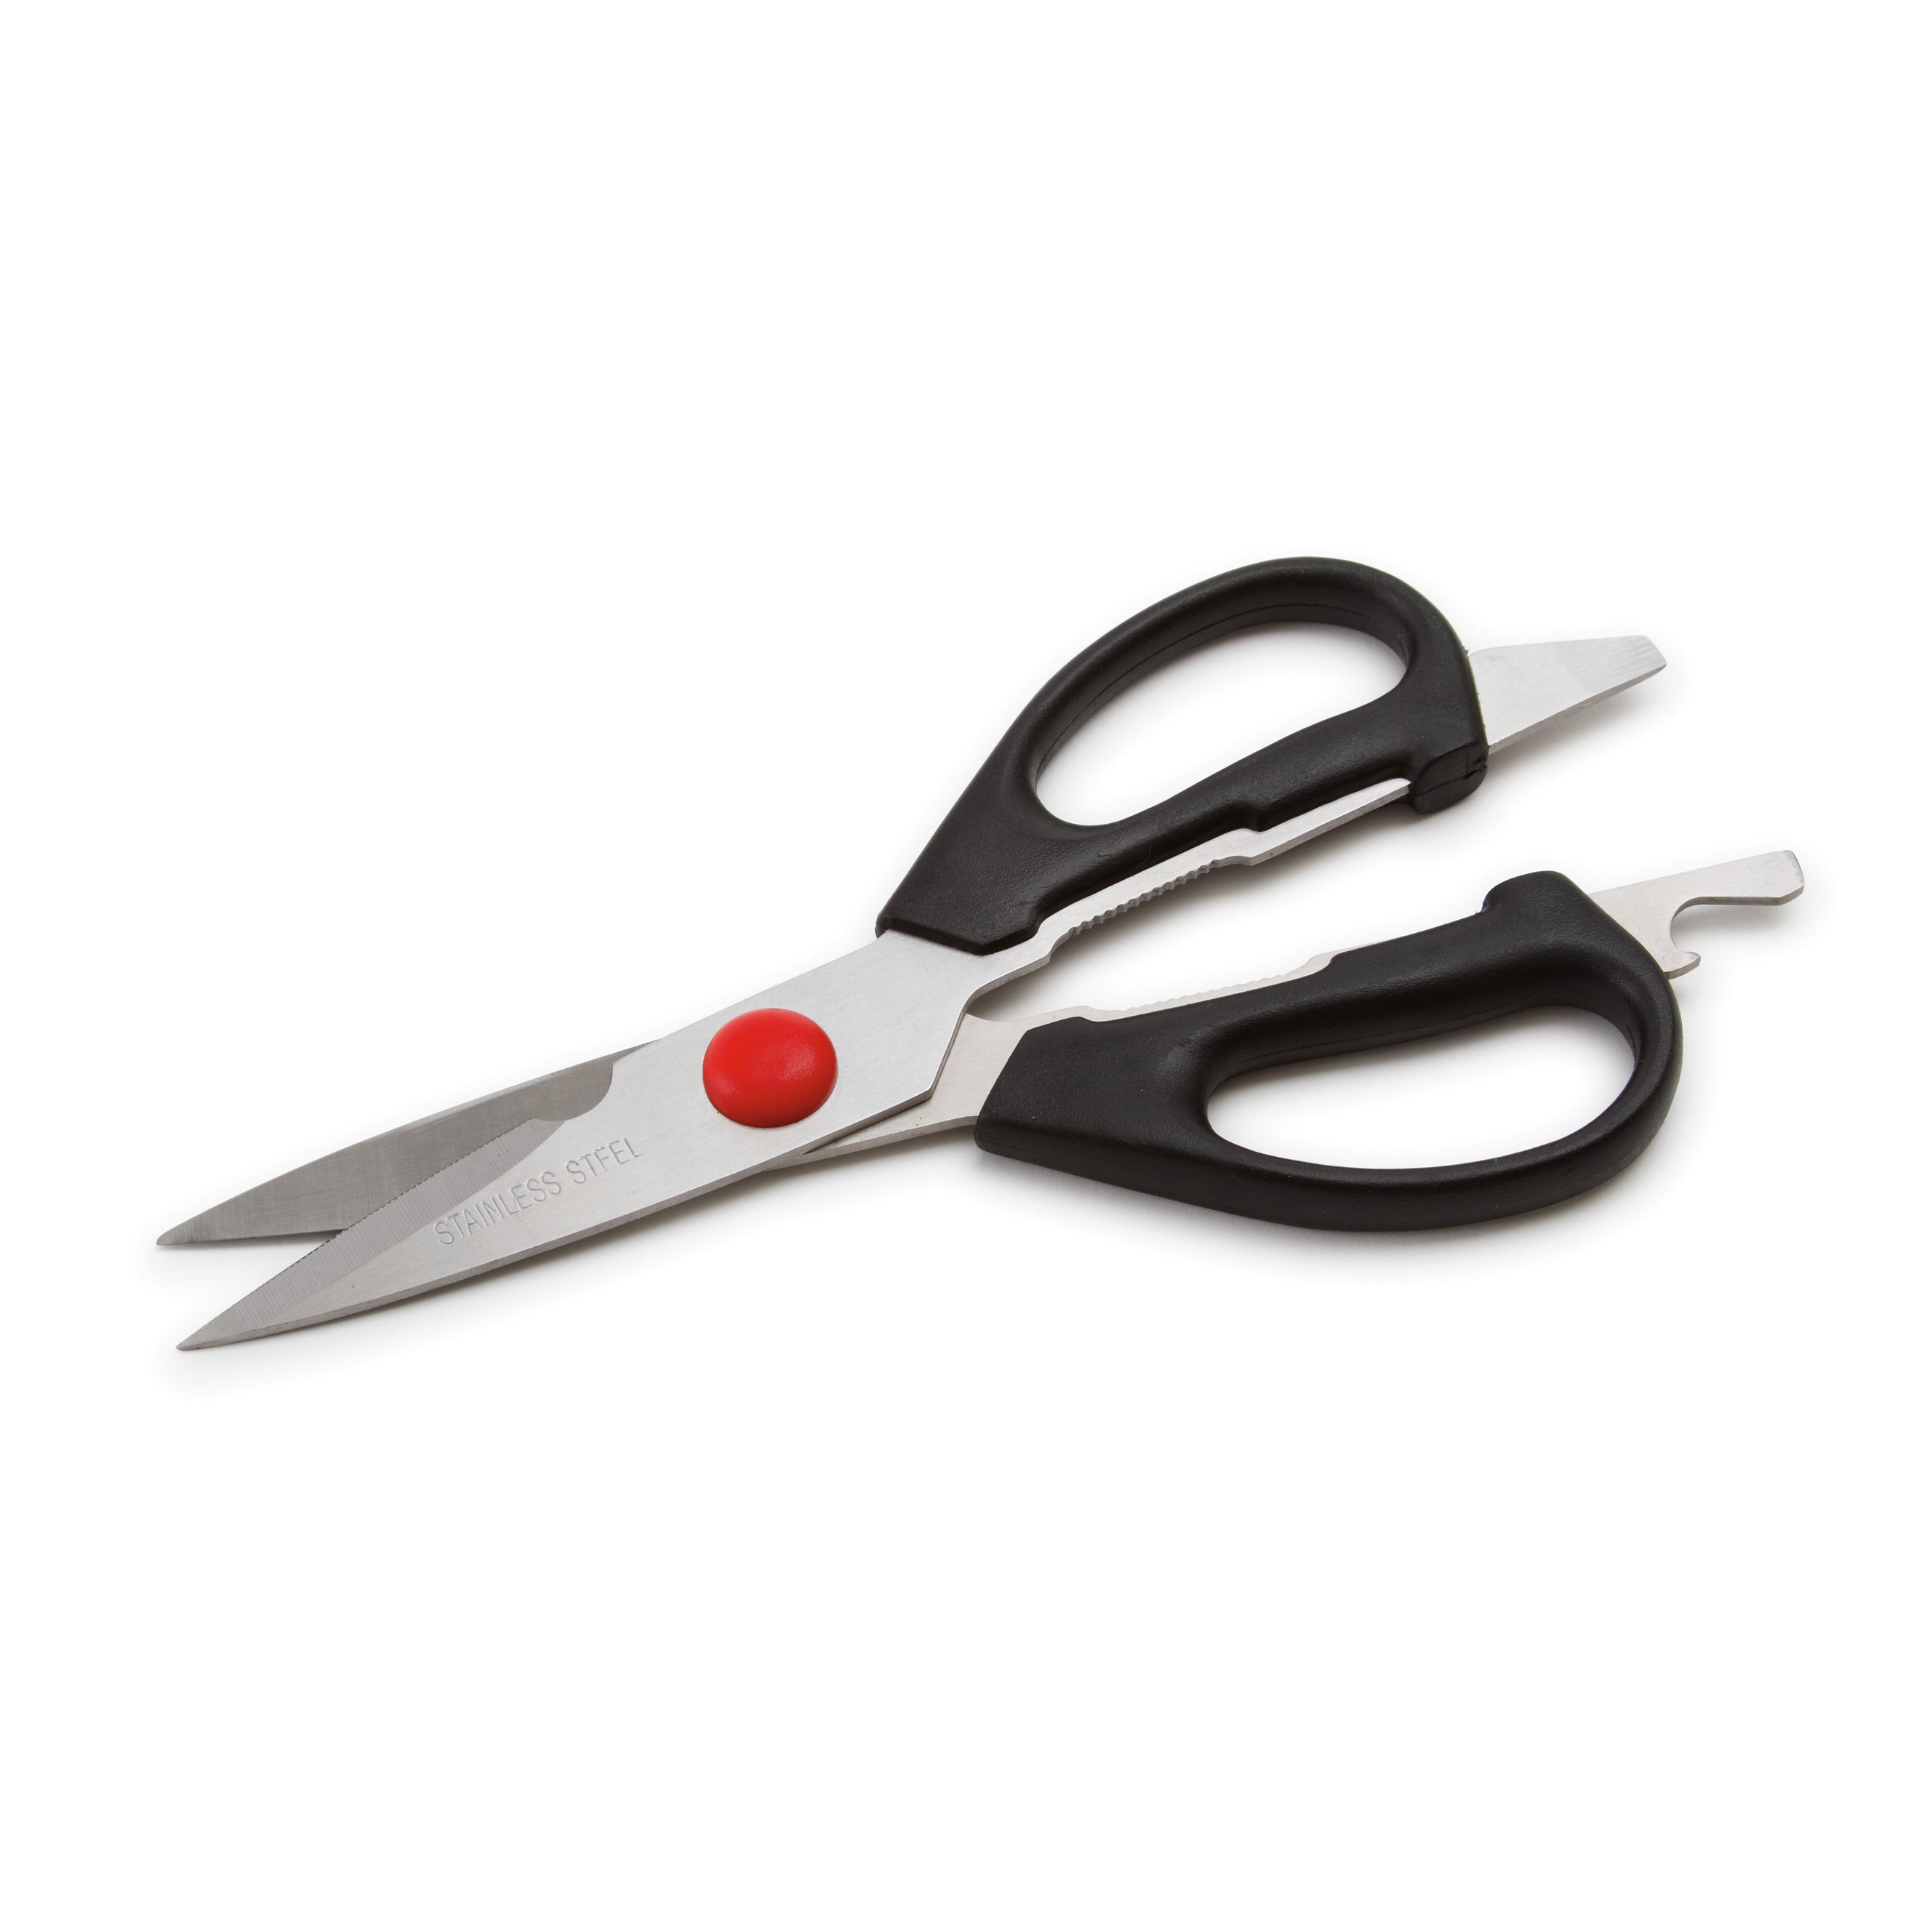 Royal Industries (ROY SCS) Kitchen Scissors, Stainless Steel